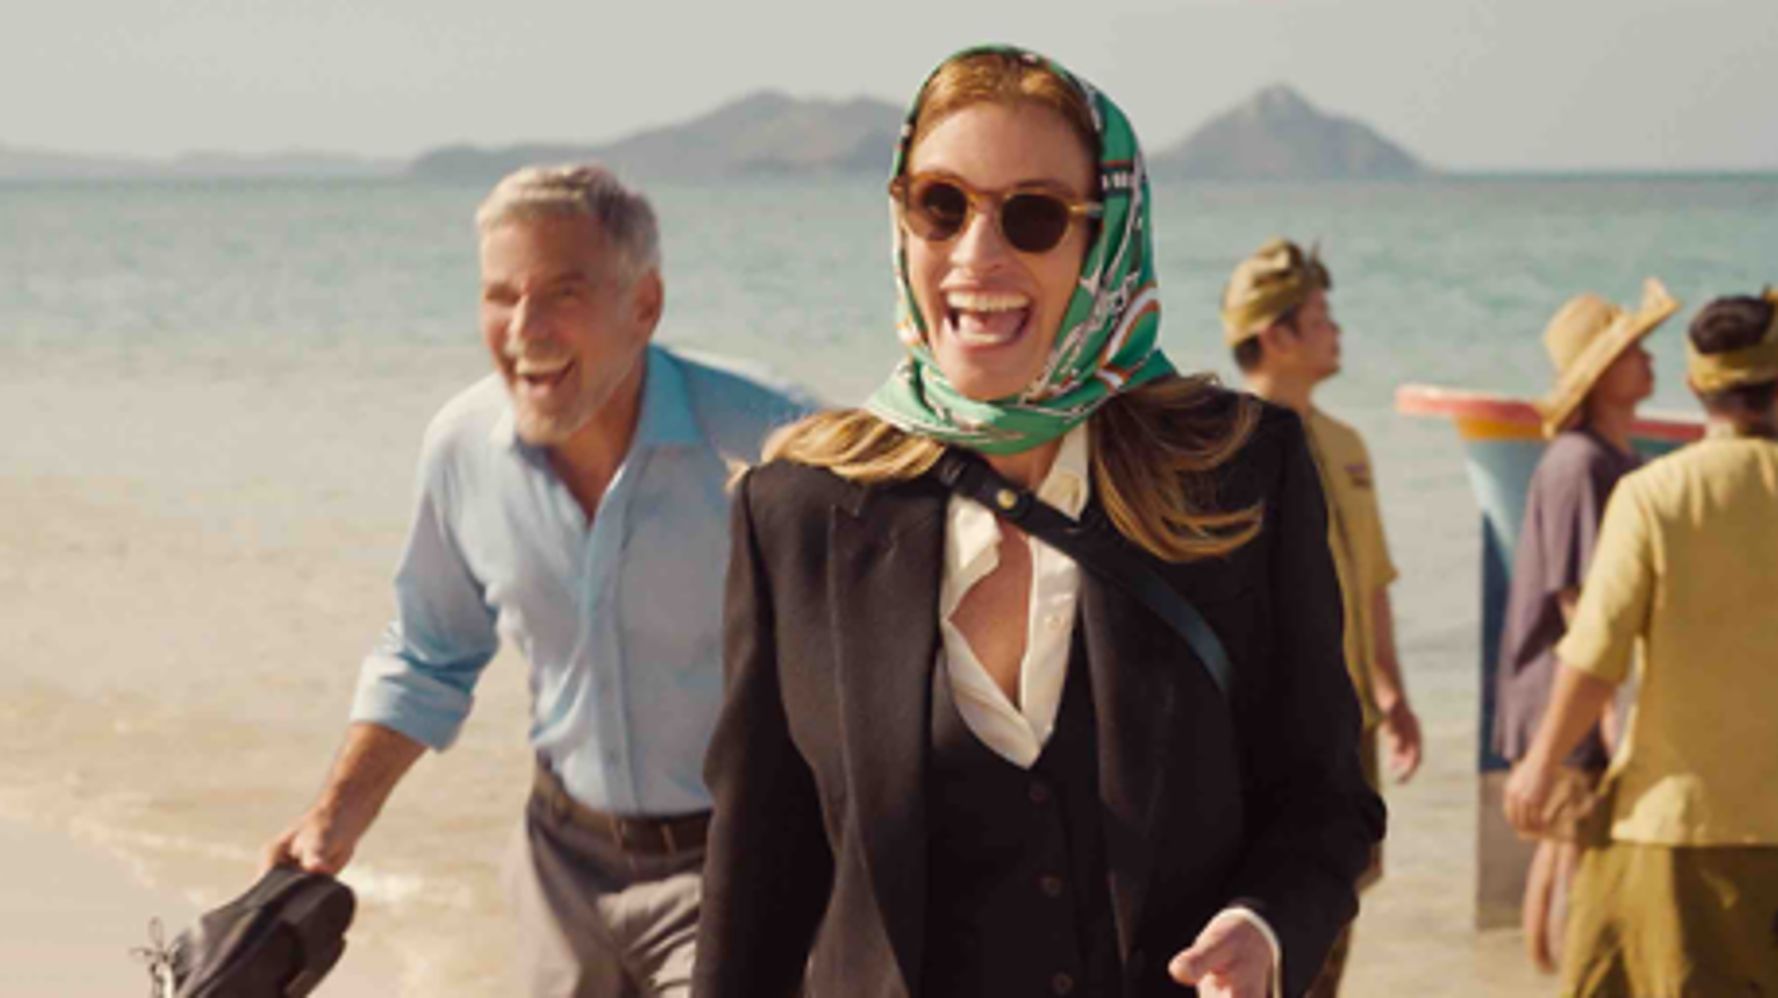 Julia Roberts And George Clooney’s Ticket To Paradise Trailer Is Taking Us Back To The Rom-Com Glory Days